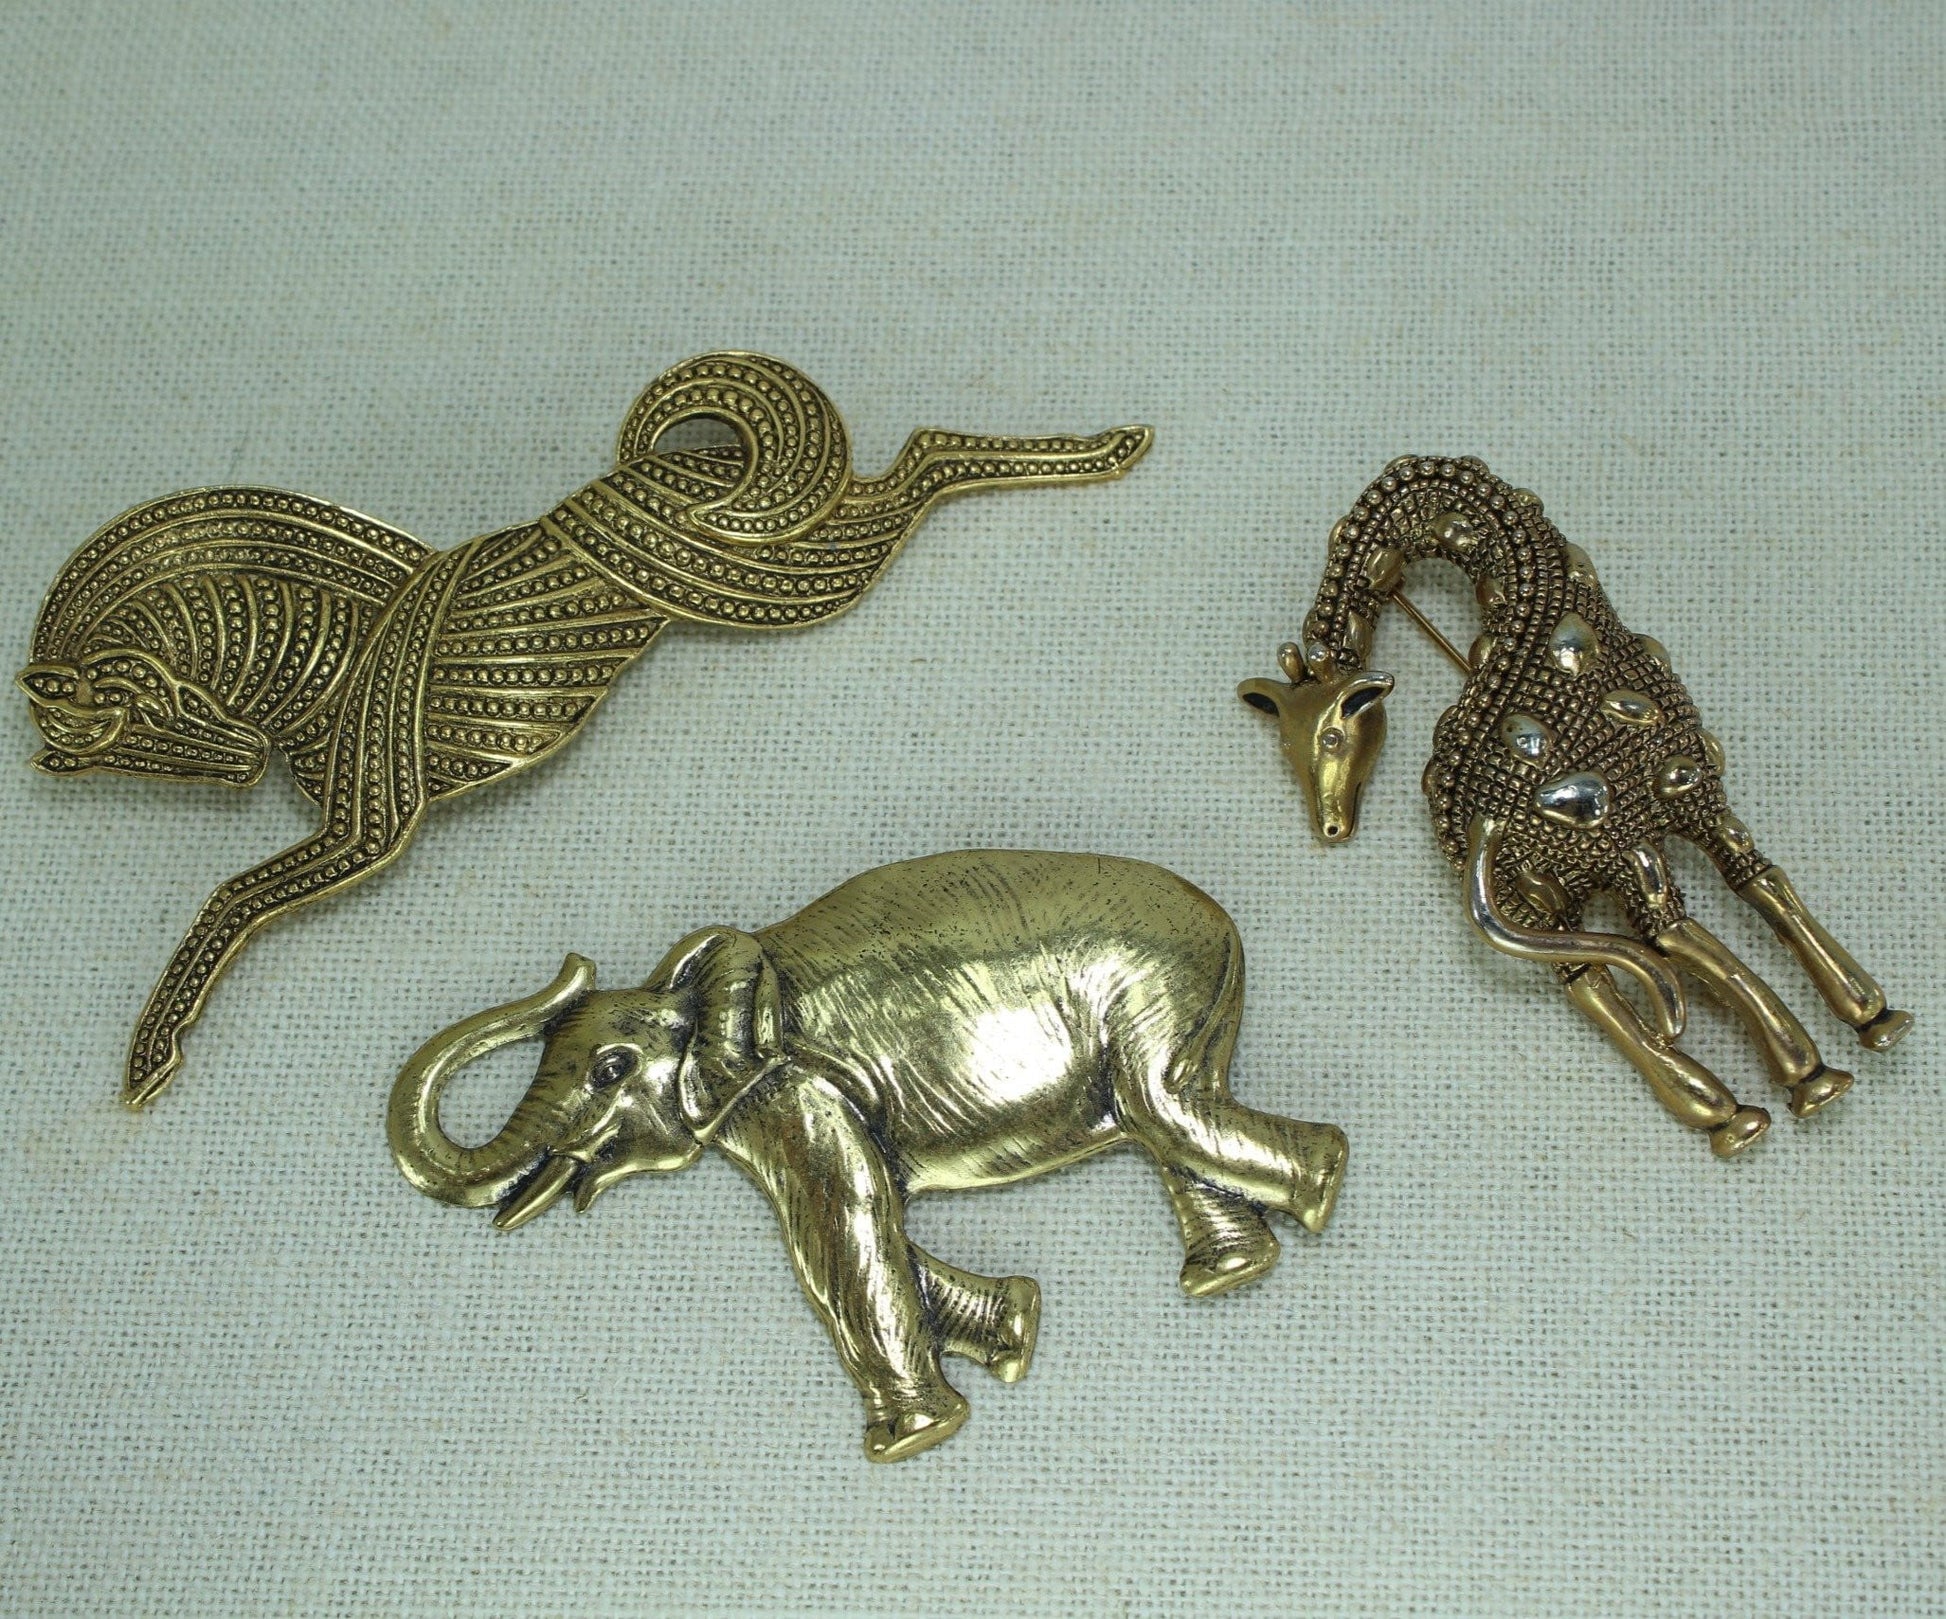 Animal Vintage Pins Lot 3 Unique Giraffe Stylized Horse Elephant  from Estates collectibles